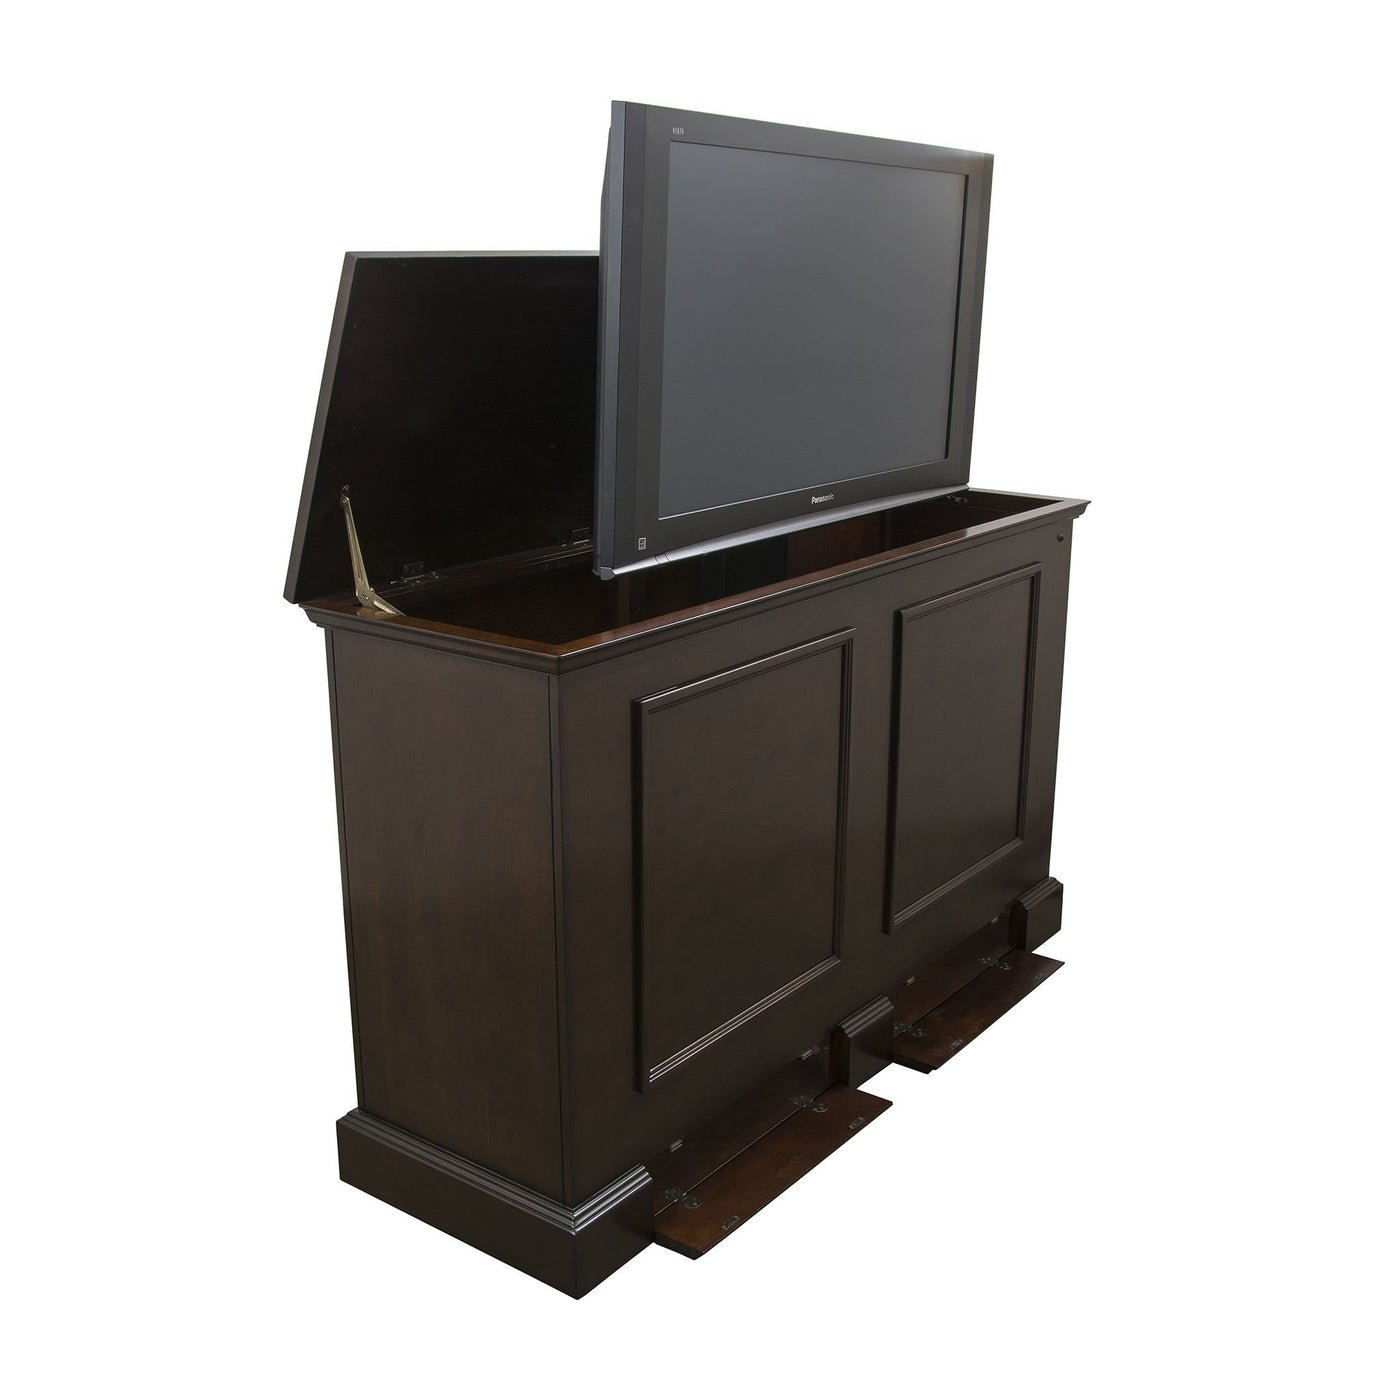 Touchstone Grand Elevate 74008 Espresso TV Lift Cabinet for 65" Flat screen TVs - TS-74008 - Avanquil